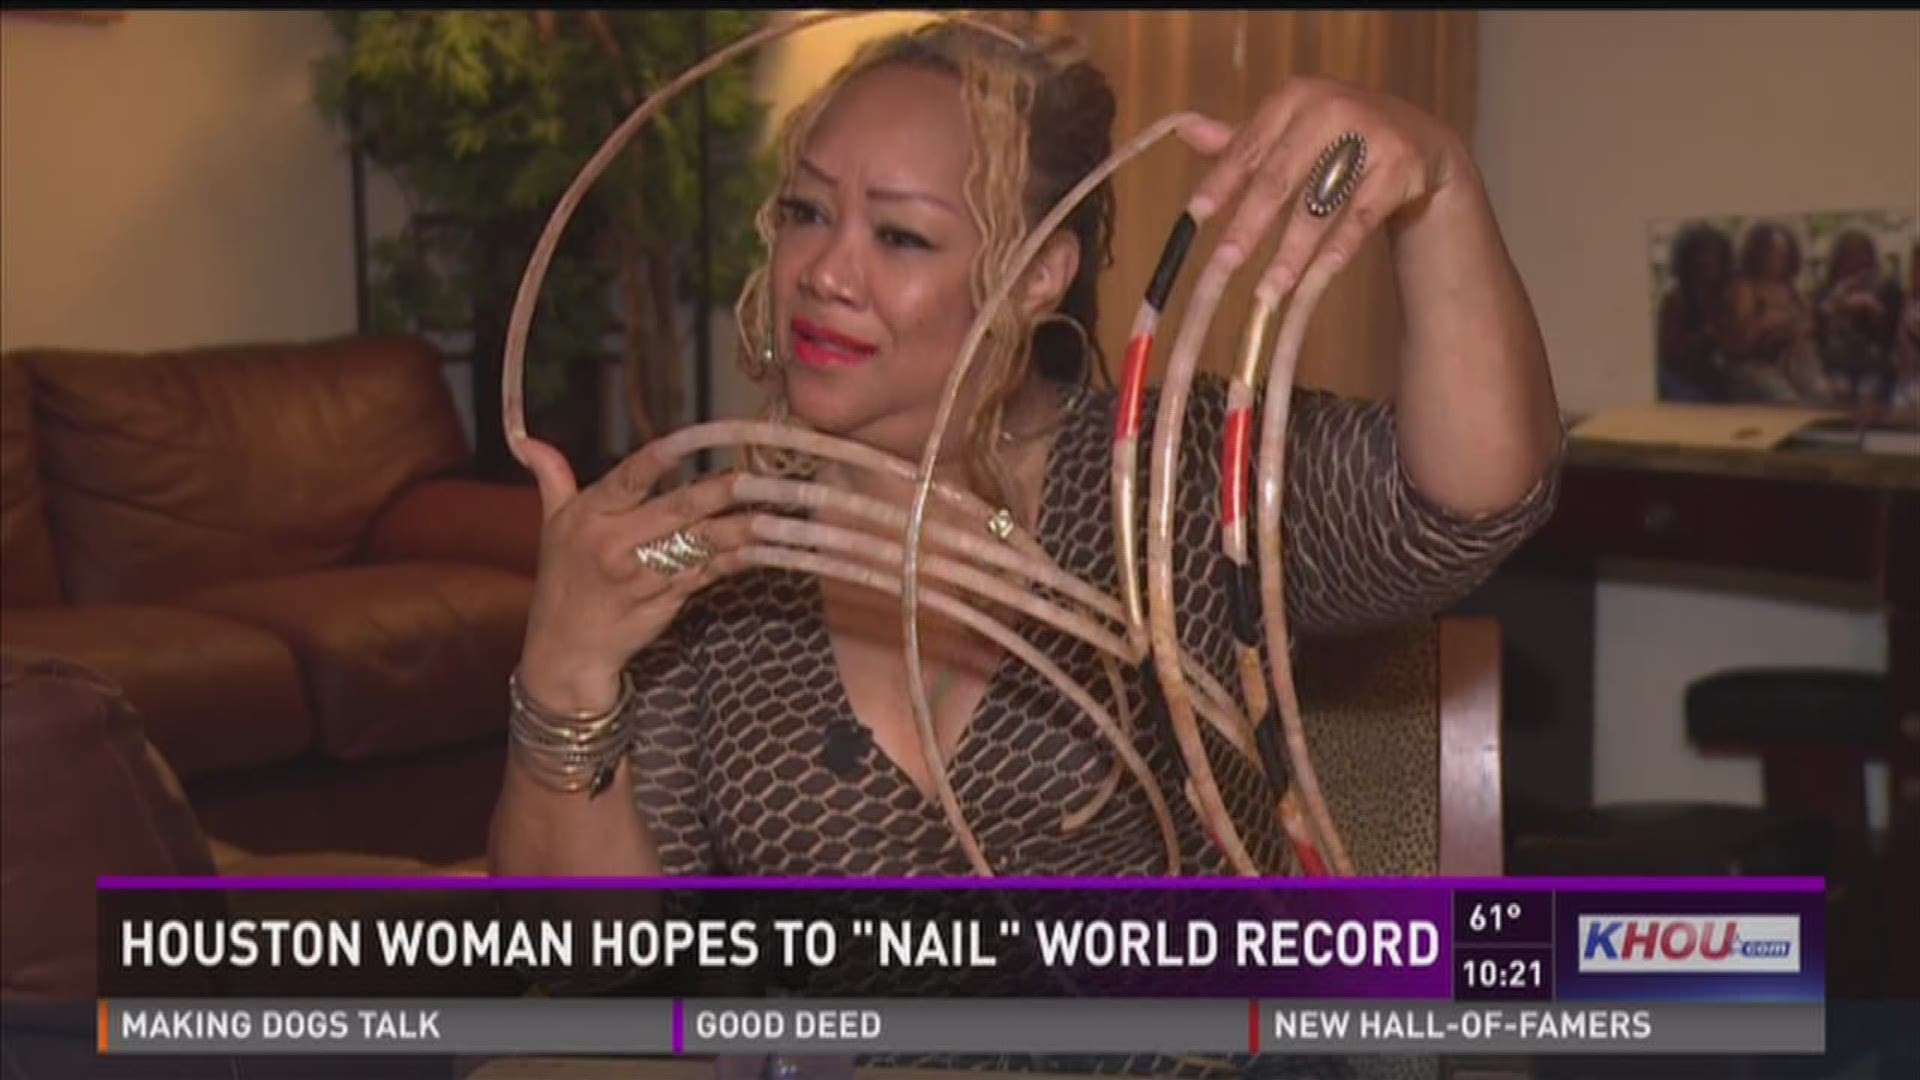 Sacrificing Hygiene for Posterity: Record Holders for Longest Human  Fingernails Are Just Gross